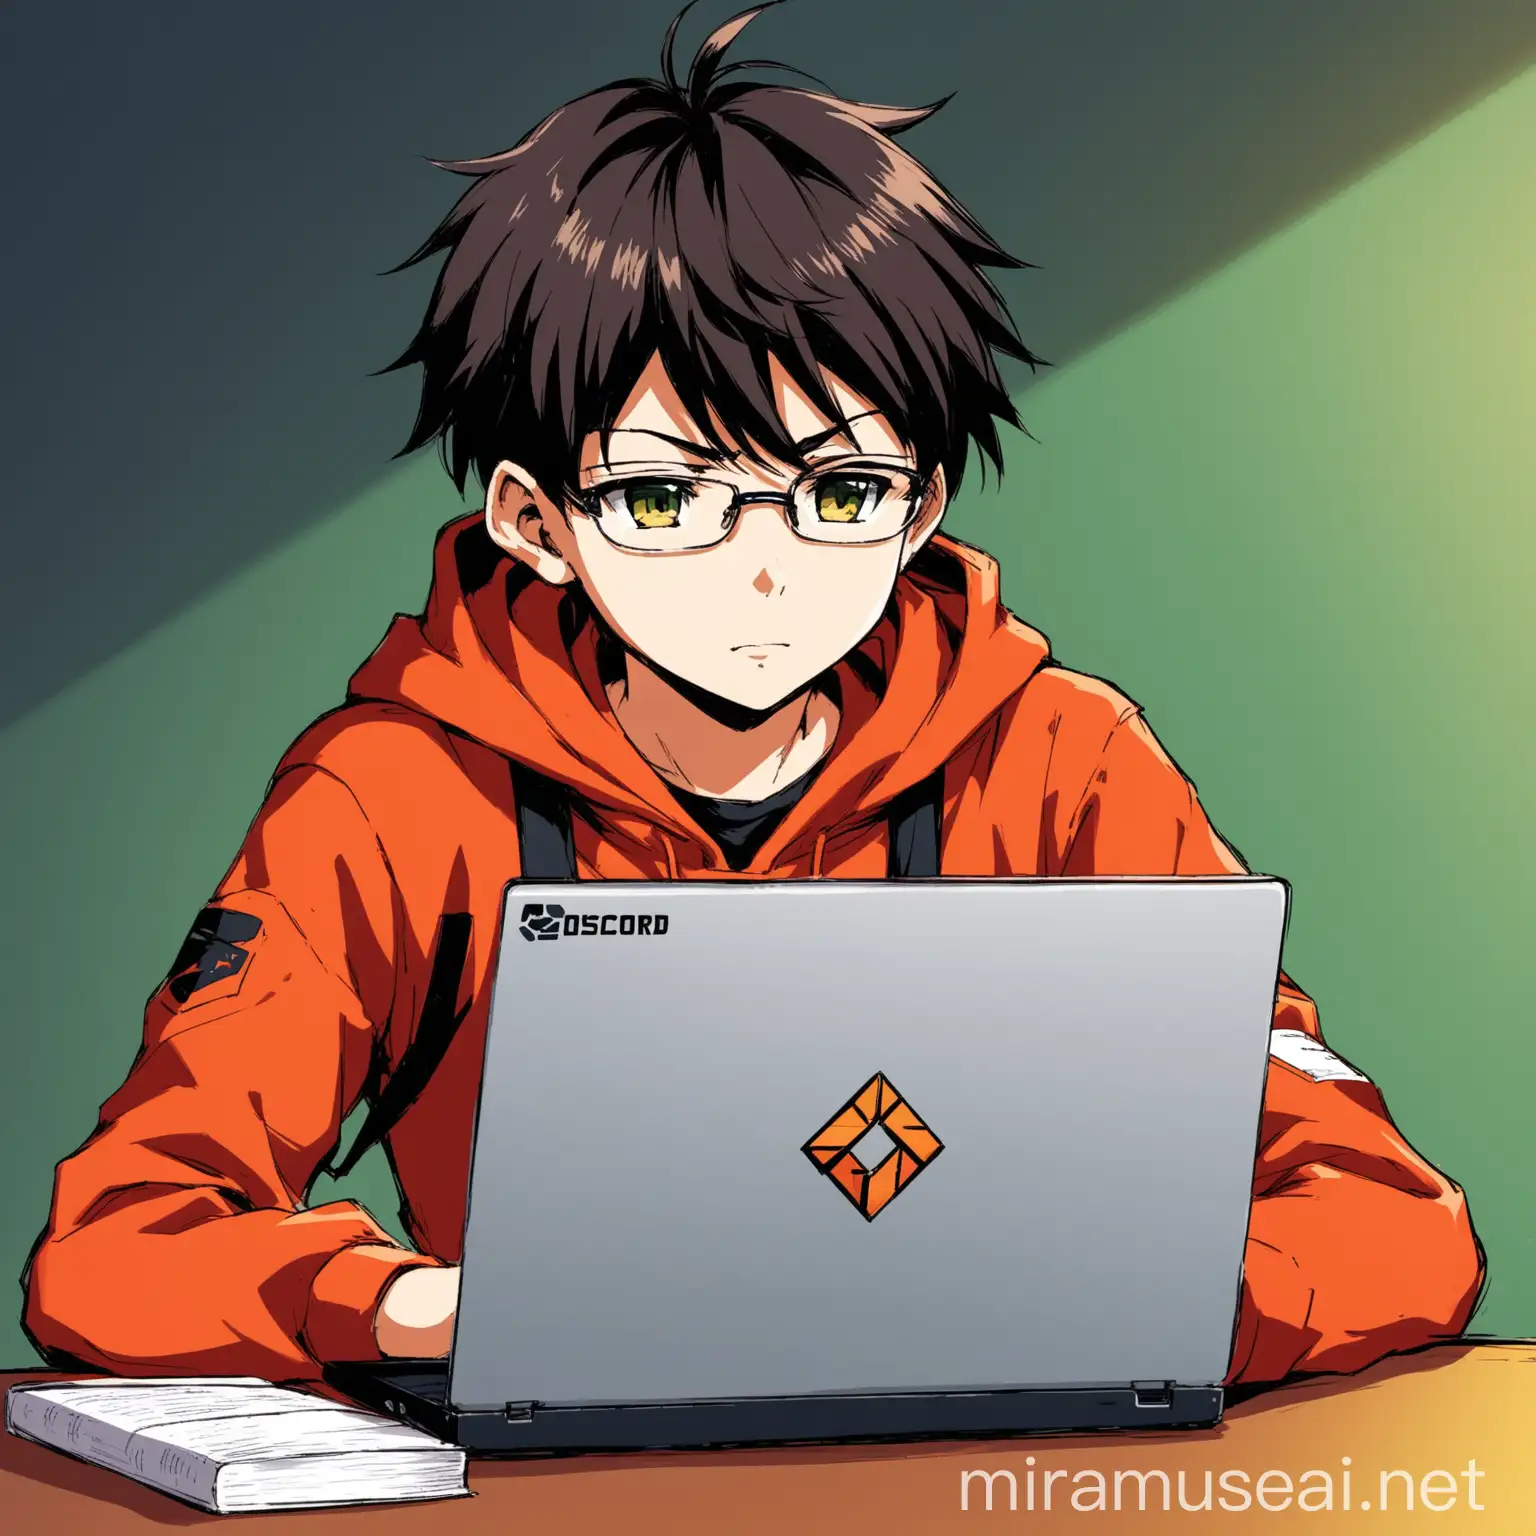 avatar for a discord server about Frontend development, whos author is a beginner visual style ghibly studio anime mixed with Akira and Evangelion style, but it has to be related to a FRONTEND DEVELOPMENT using JavaScript
Image has to contain a young programmer with a laptop, writing code on it, it have to look more like old anime style
JavaScript should be mentioned on the image